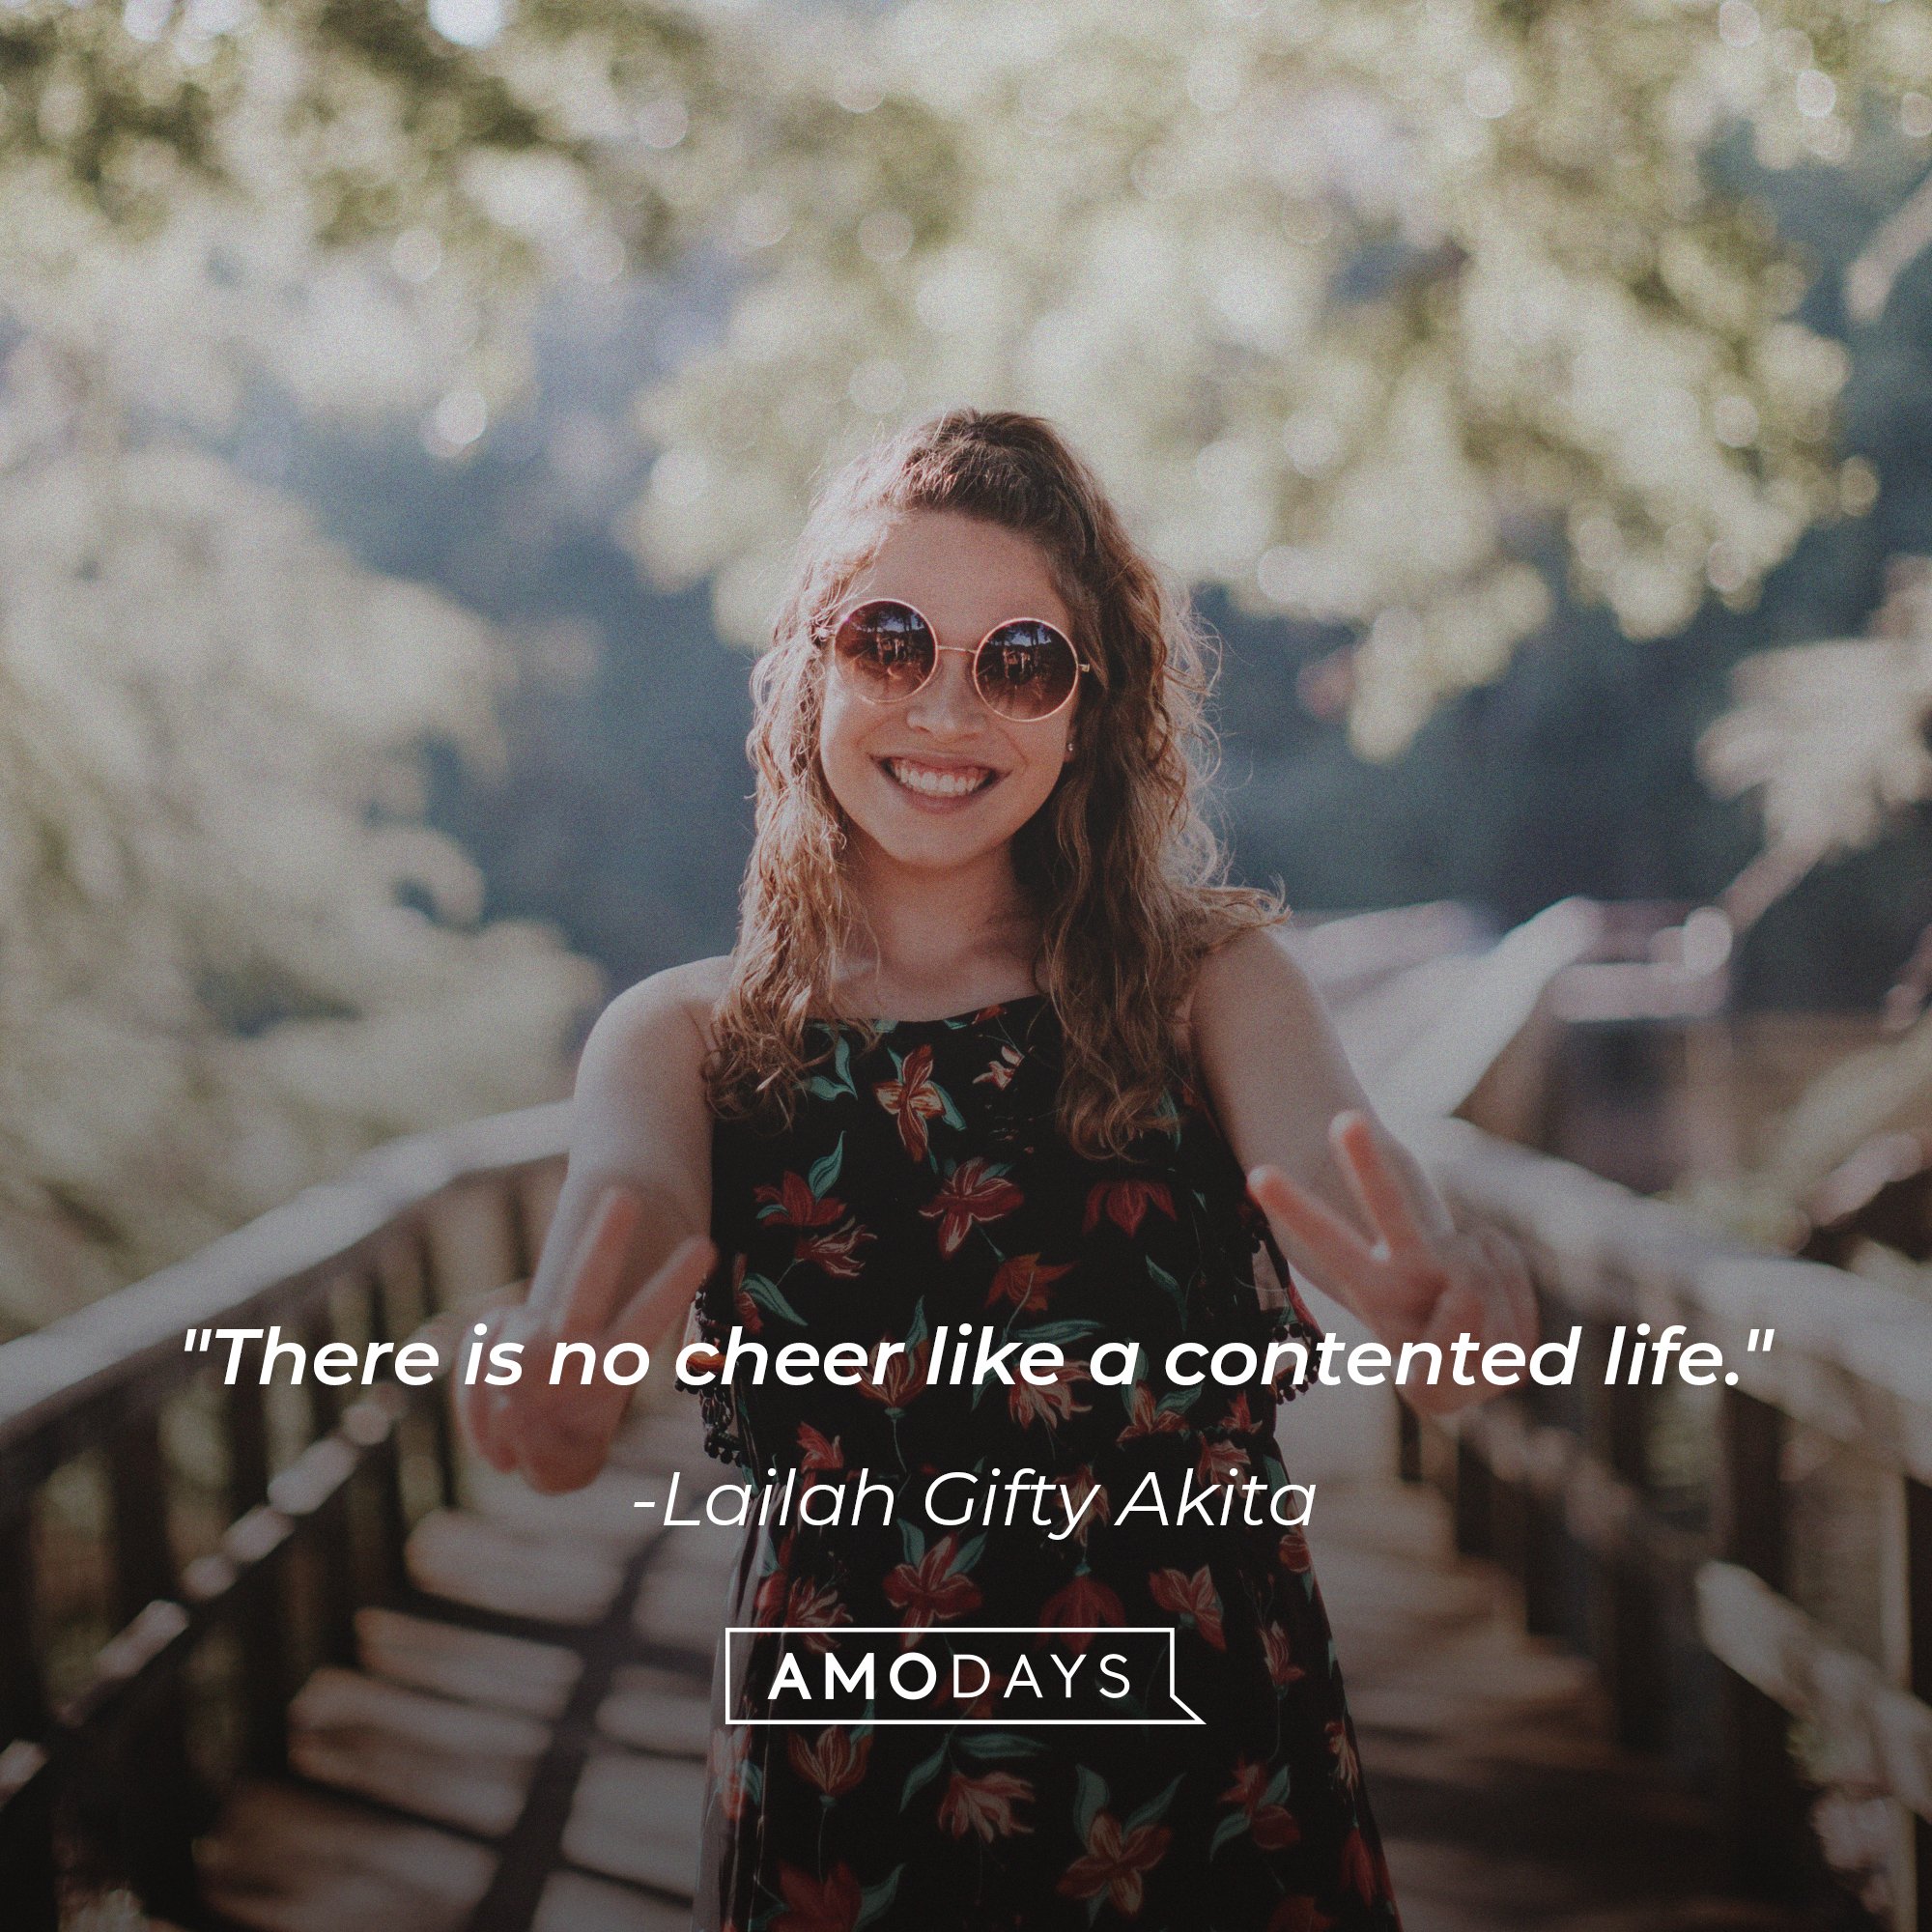 Lailah Gifty Akita’s quote: "There is no good cheer like to be content." | Image: AmoDays 